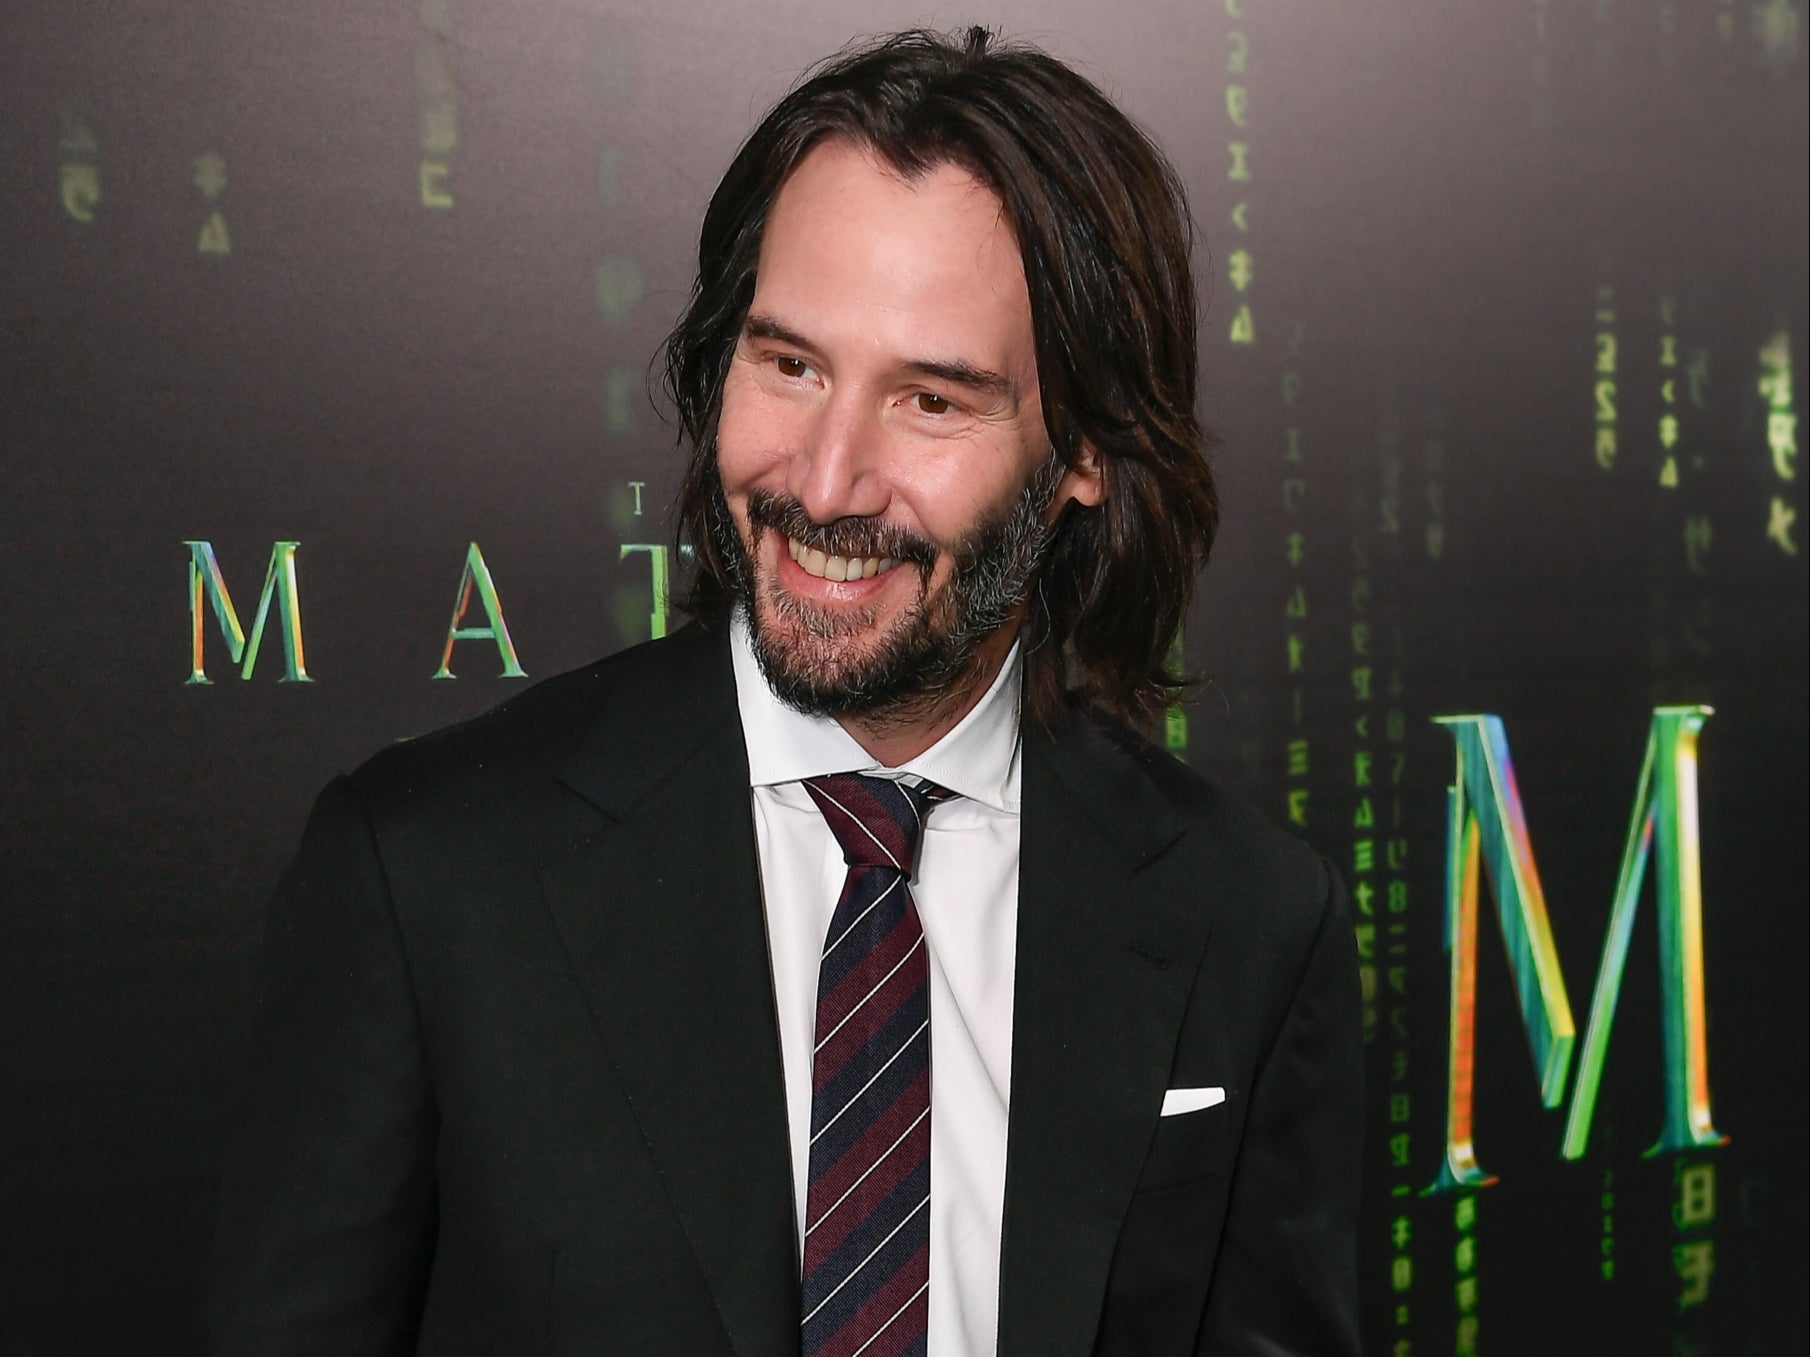 Keanu Reeves on the red carpet for ‘The Matrix Resurrections’ on 18 December 2021 in San Francisco, California